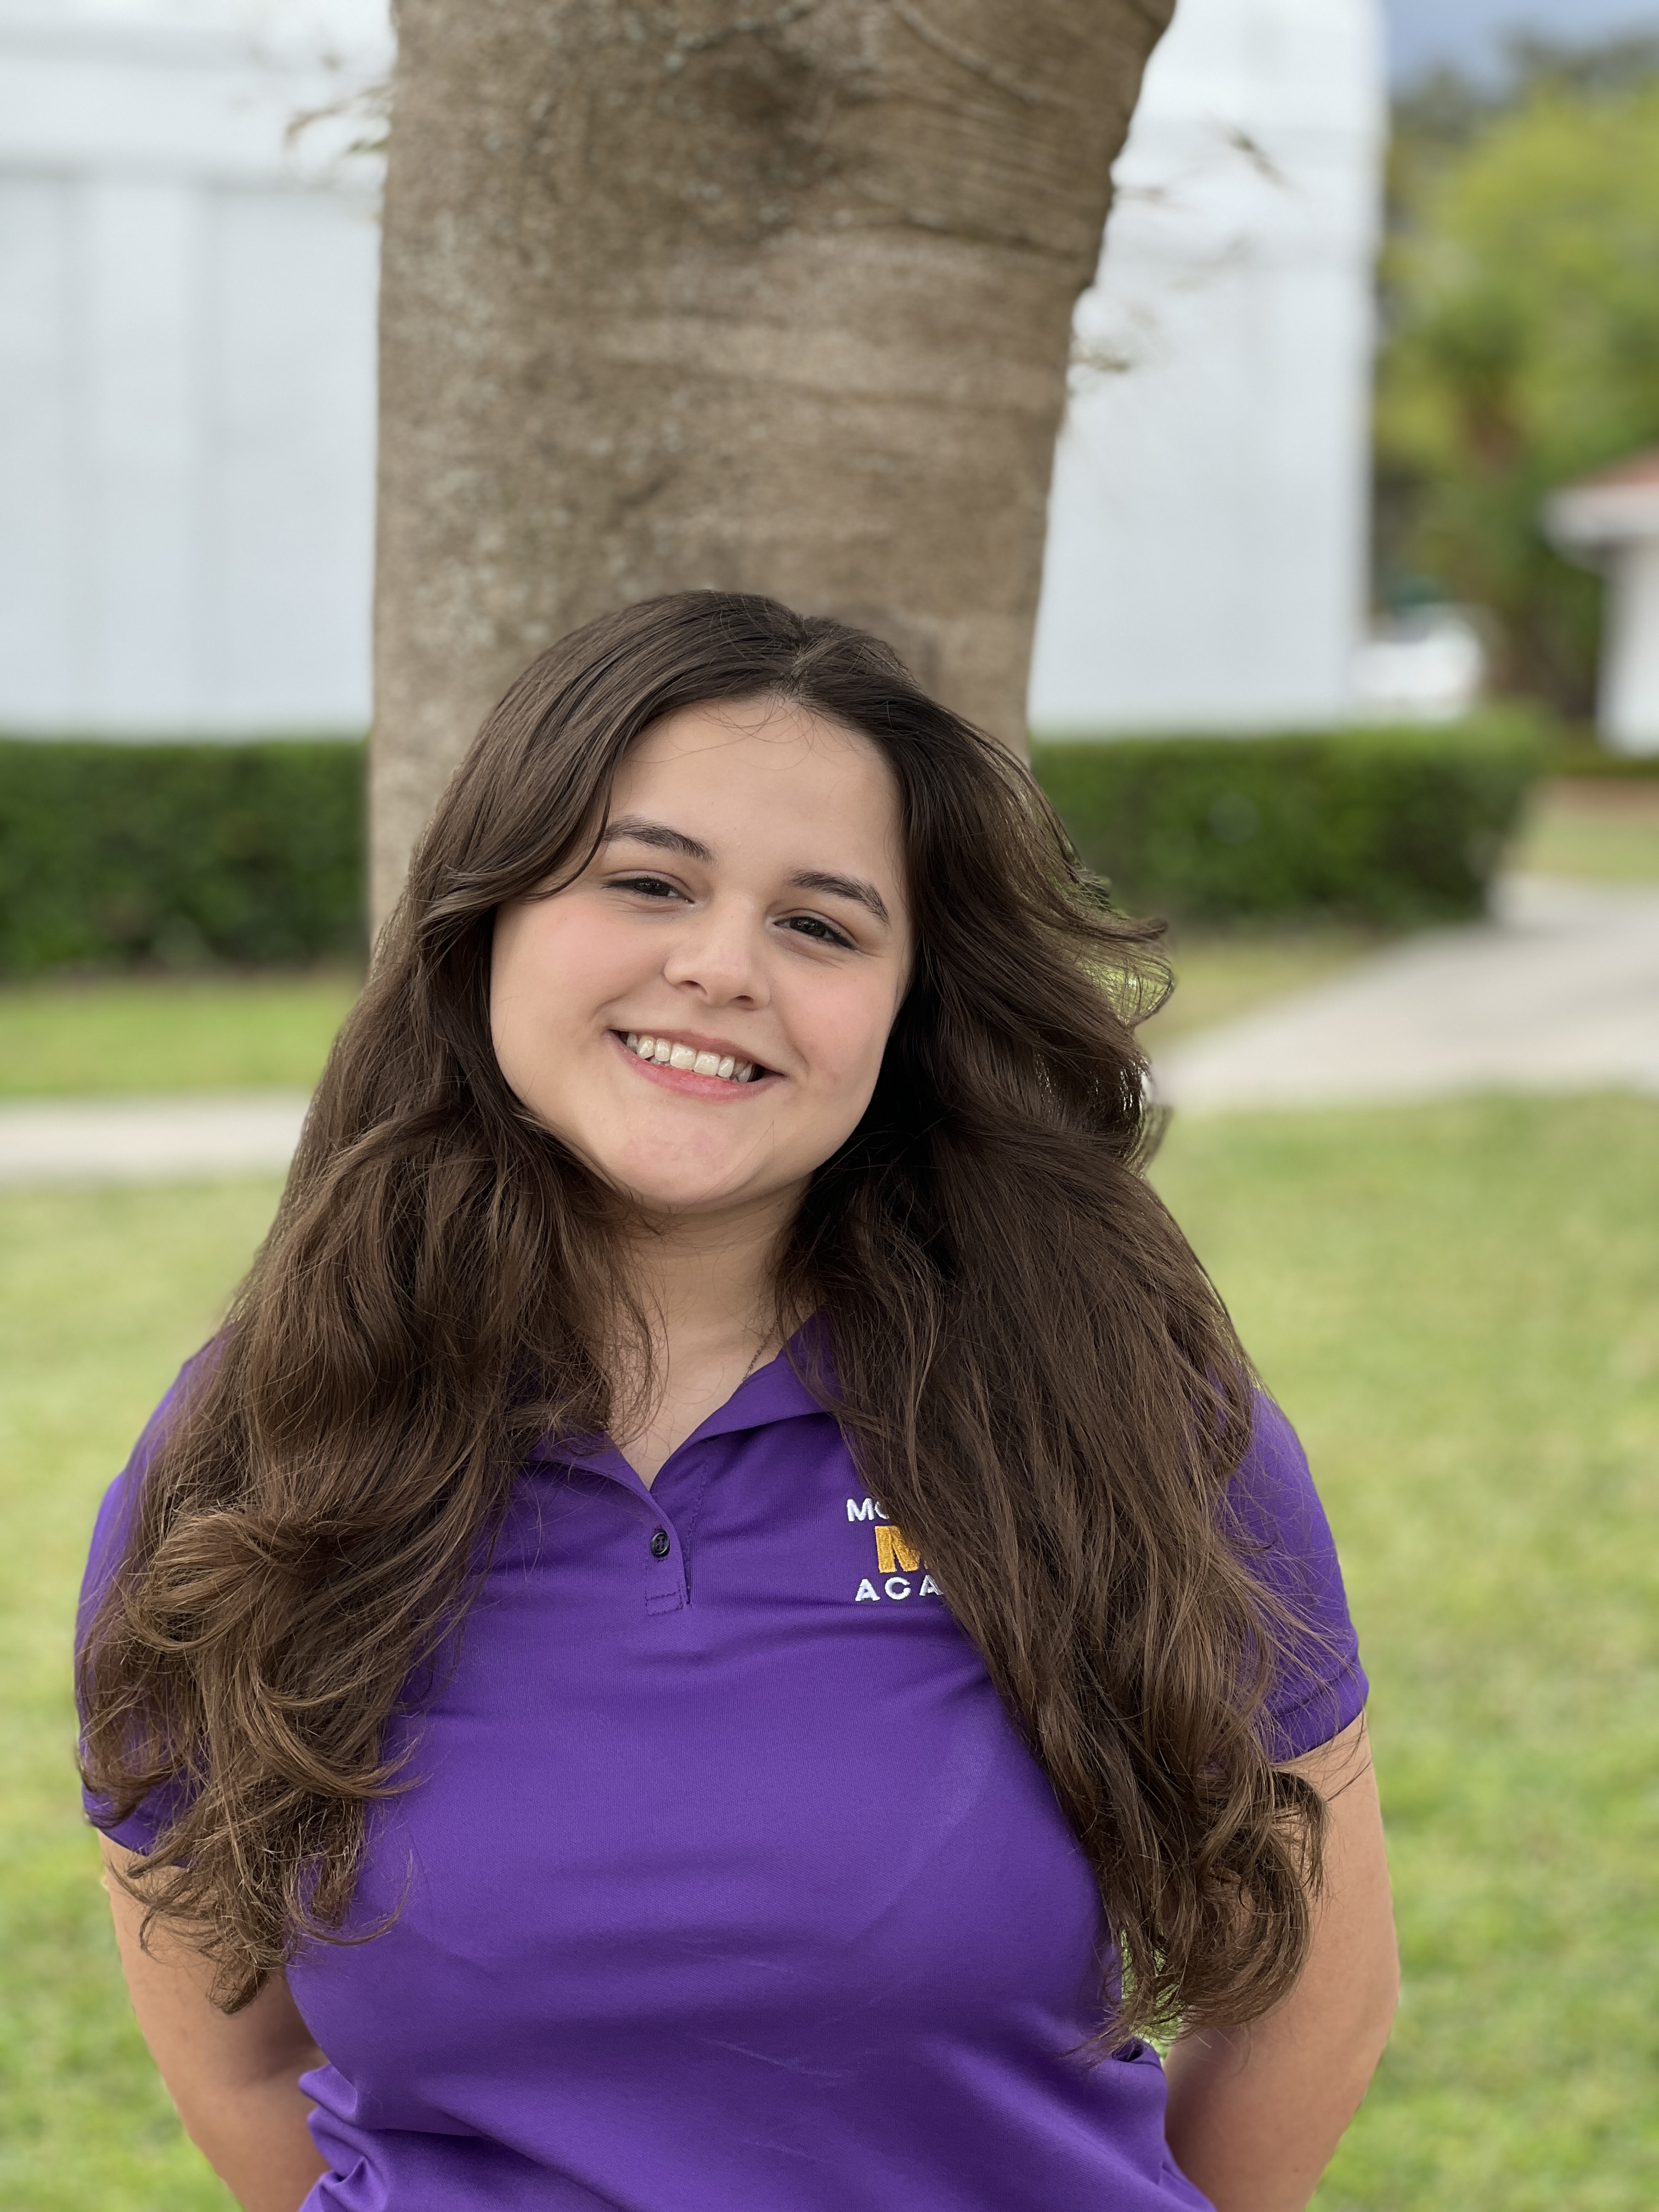 A young female student with brown hair and a purple polo shirt smiles at the camera while standing in front of a tree.